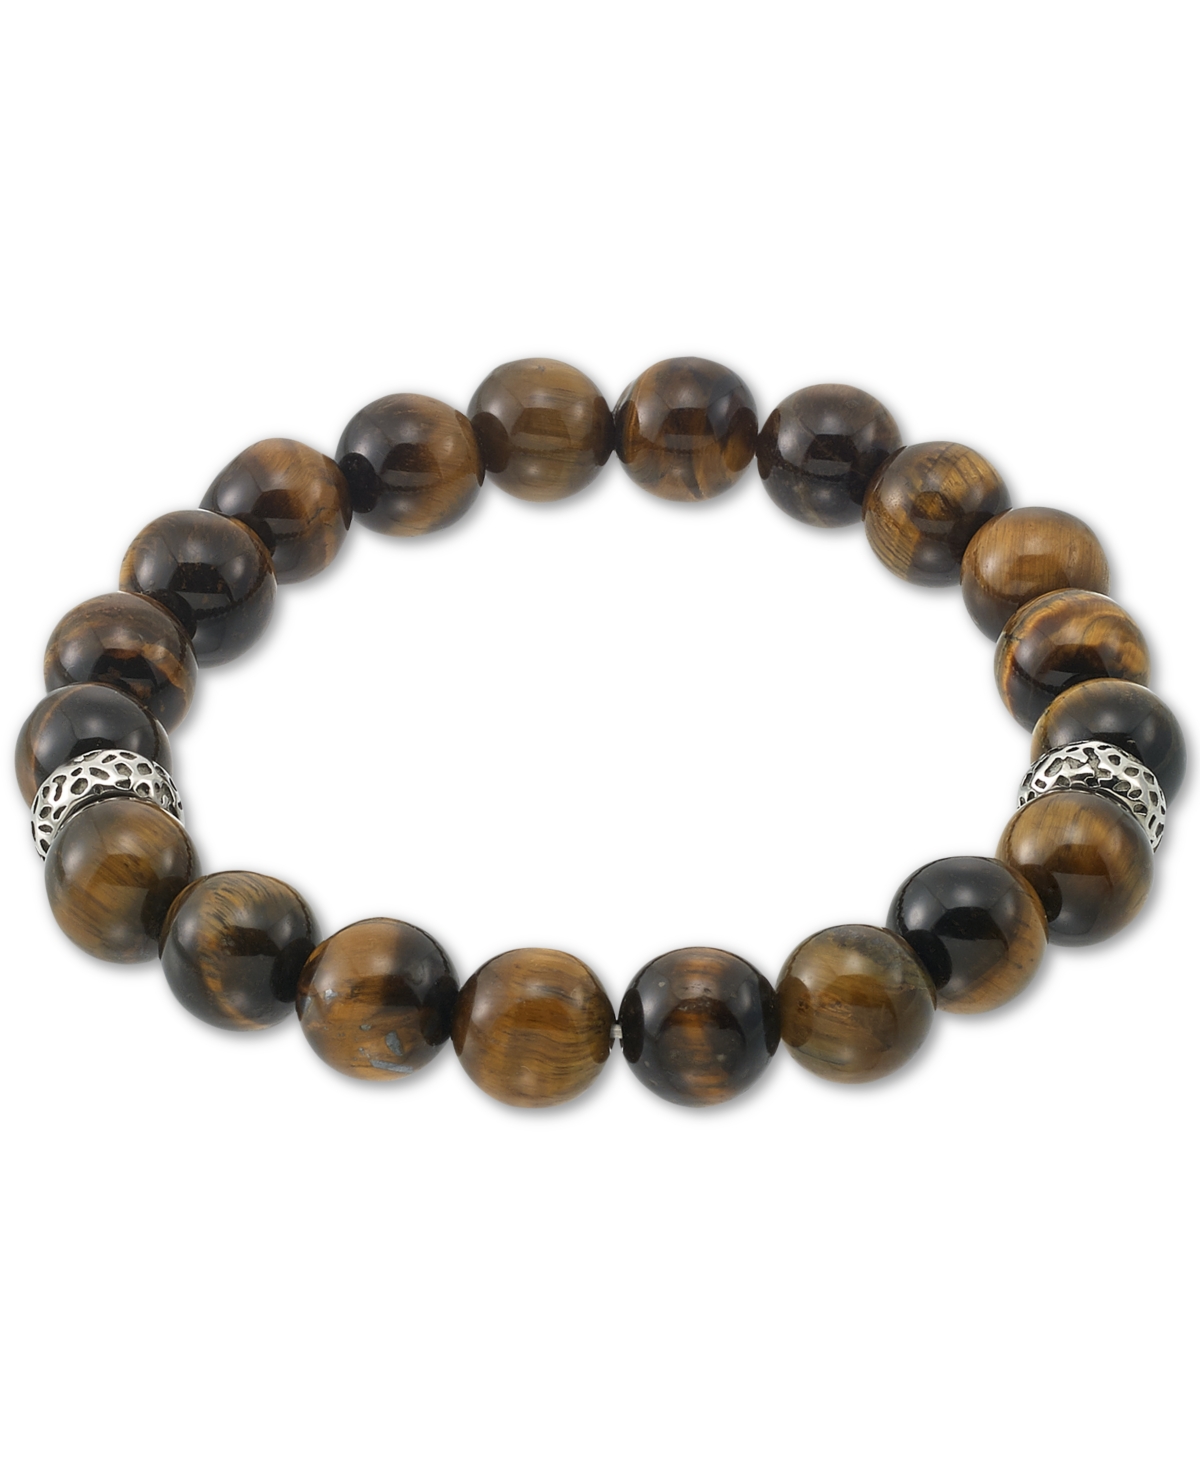 Smith Tiger's Eye (10mm) Stretch Bracelet in Stainless Steel - Stainless Steel